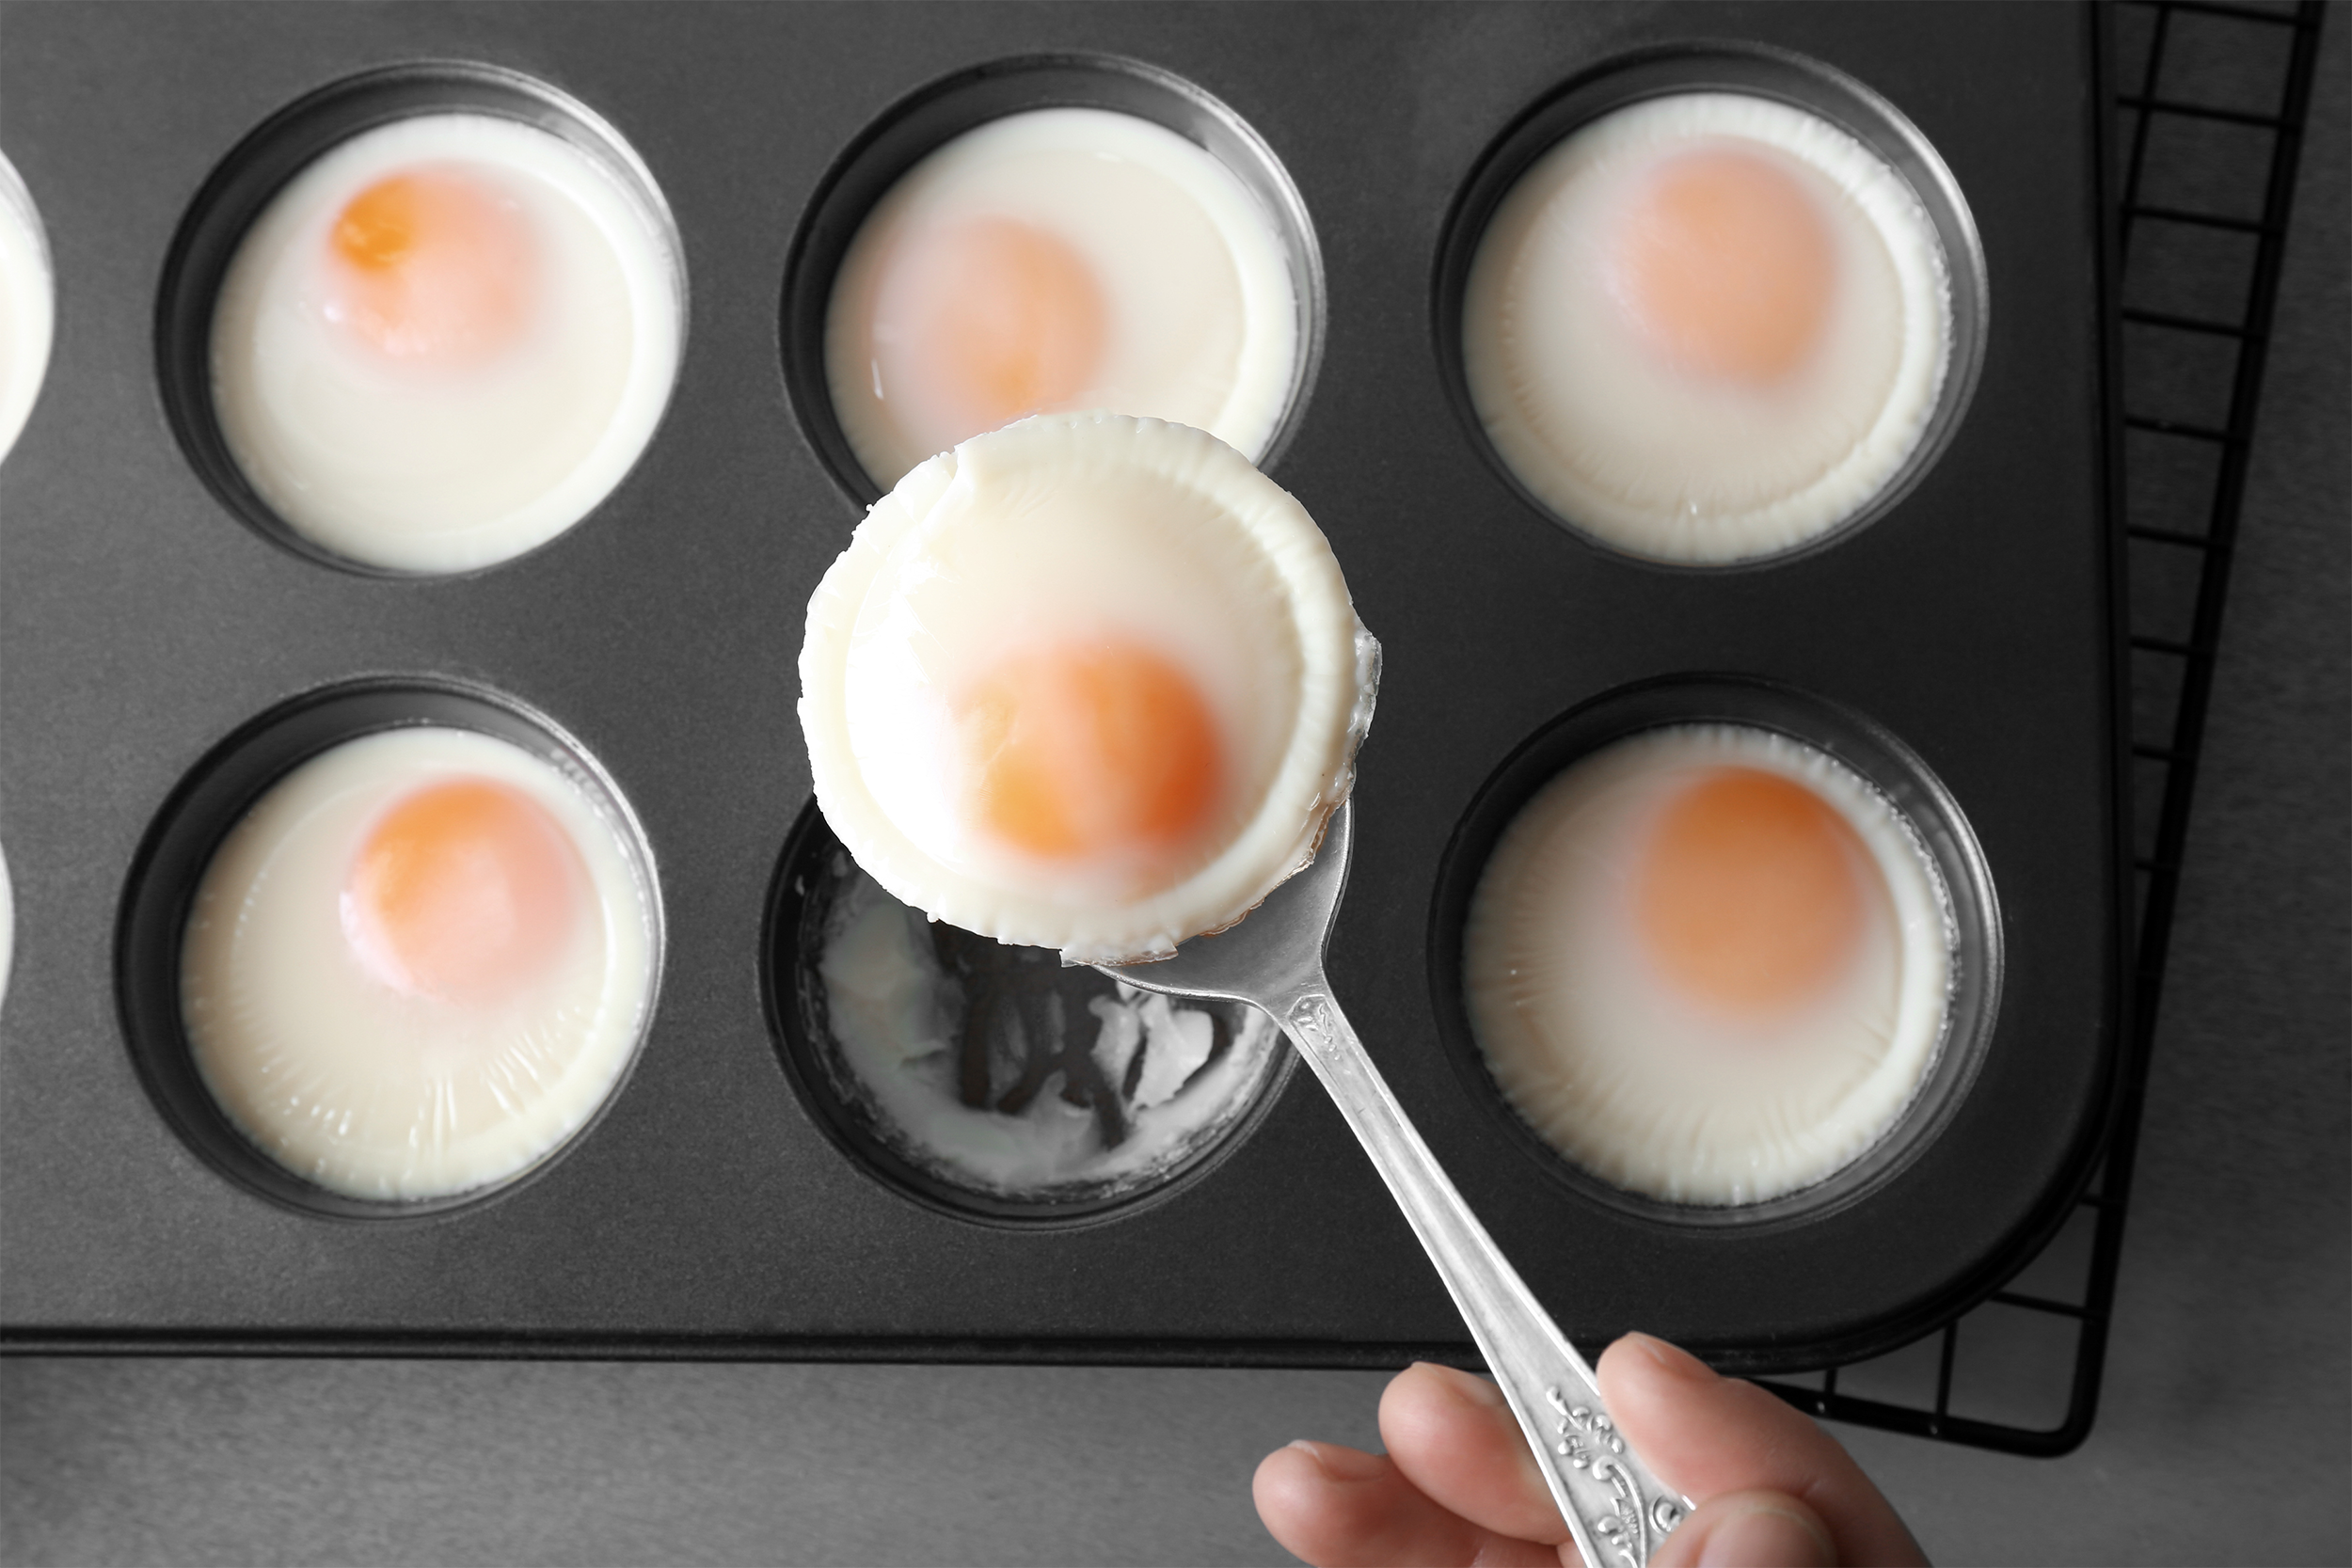 <p>The easiest and most elegant way to serve baked eggs is in small ramekins, although a muffin tin works too. Preheat the oven to 350 degrees. For each serving, break two eggs and empty them into a greased ramekin (or muffin tin). Carefully spoon 1 tablespoon milk or cream over the eggs, making sure to cover them evenly, and sprinkle with salt and pepper to taste. Bake for about 15 minutes, or until the eggs are set and baked to perfection. Enjoy!</p>